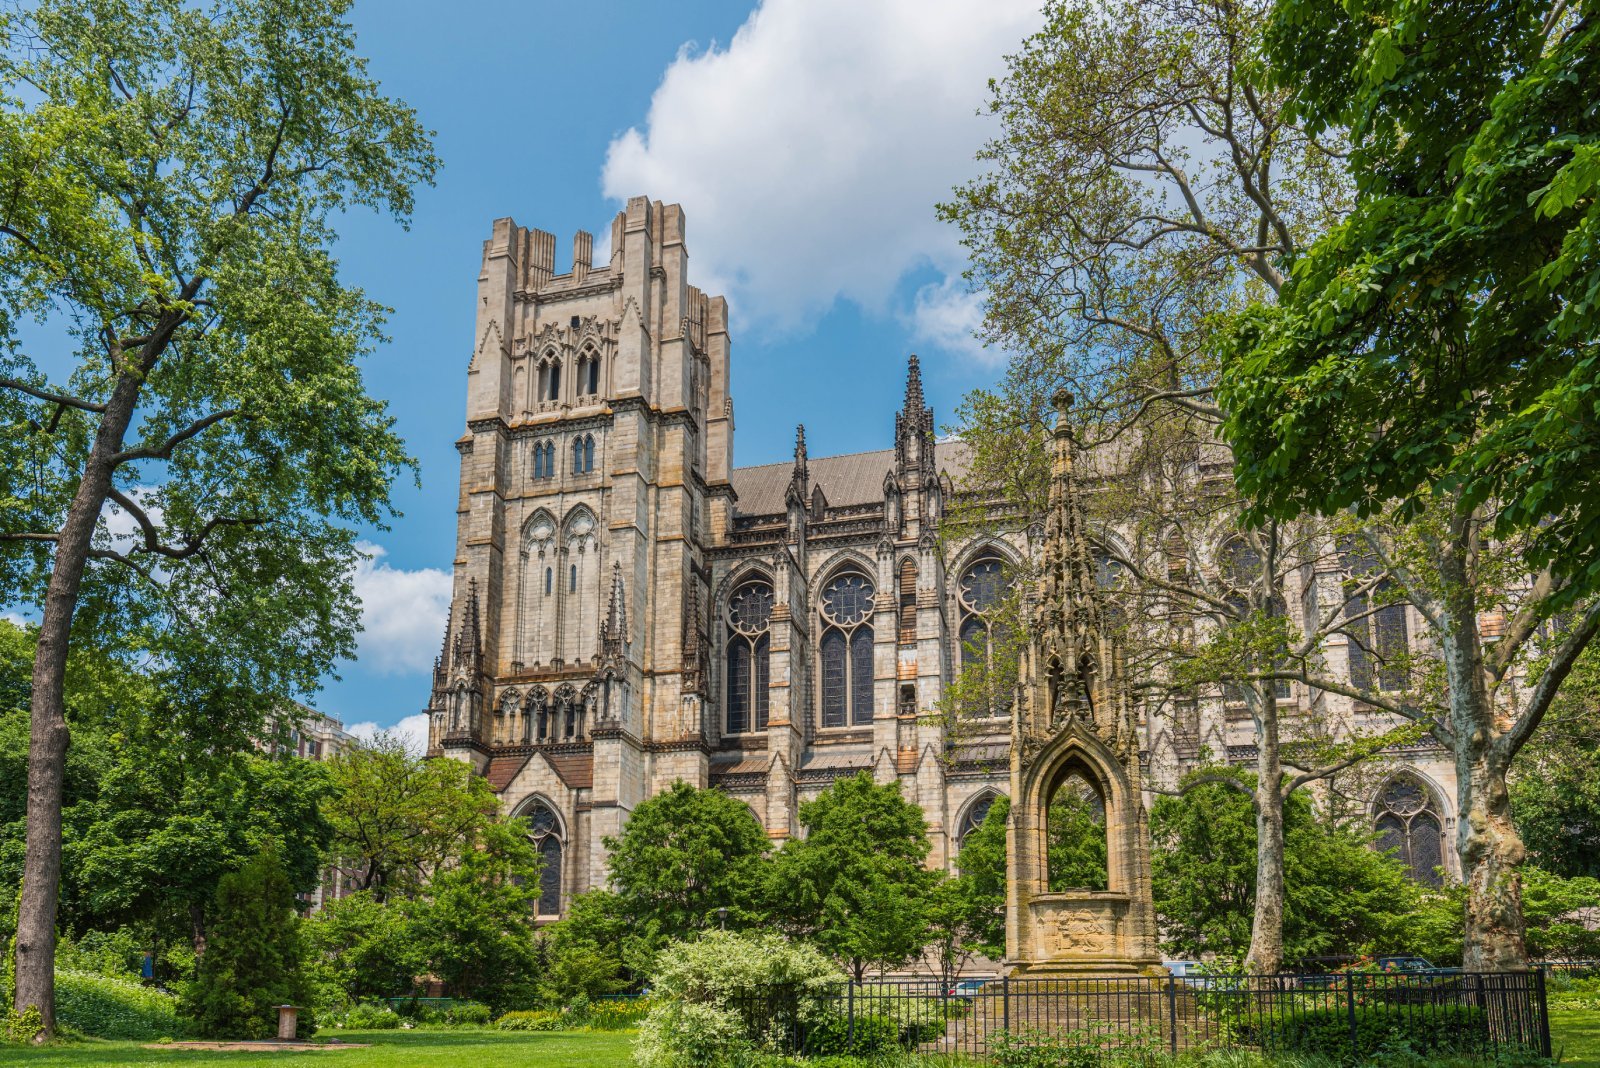 Image Credit: Shutterstock / KazT <p><span>One of the largest cathedrals in the world, this New York City landmark invites visitors to marvel at its beauty and partake in its rich tapestry of religious and cultural events.</span></p>